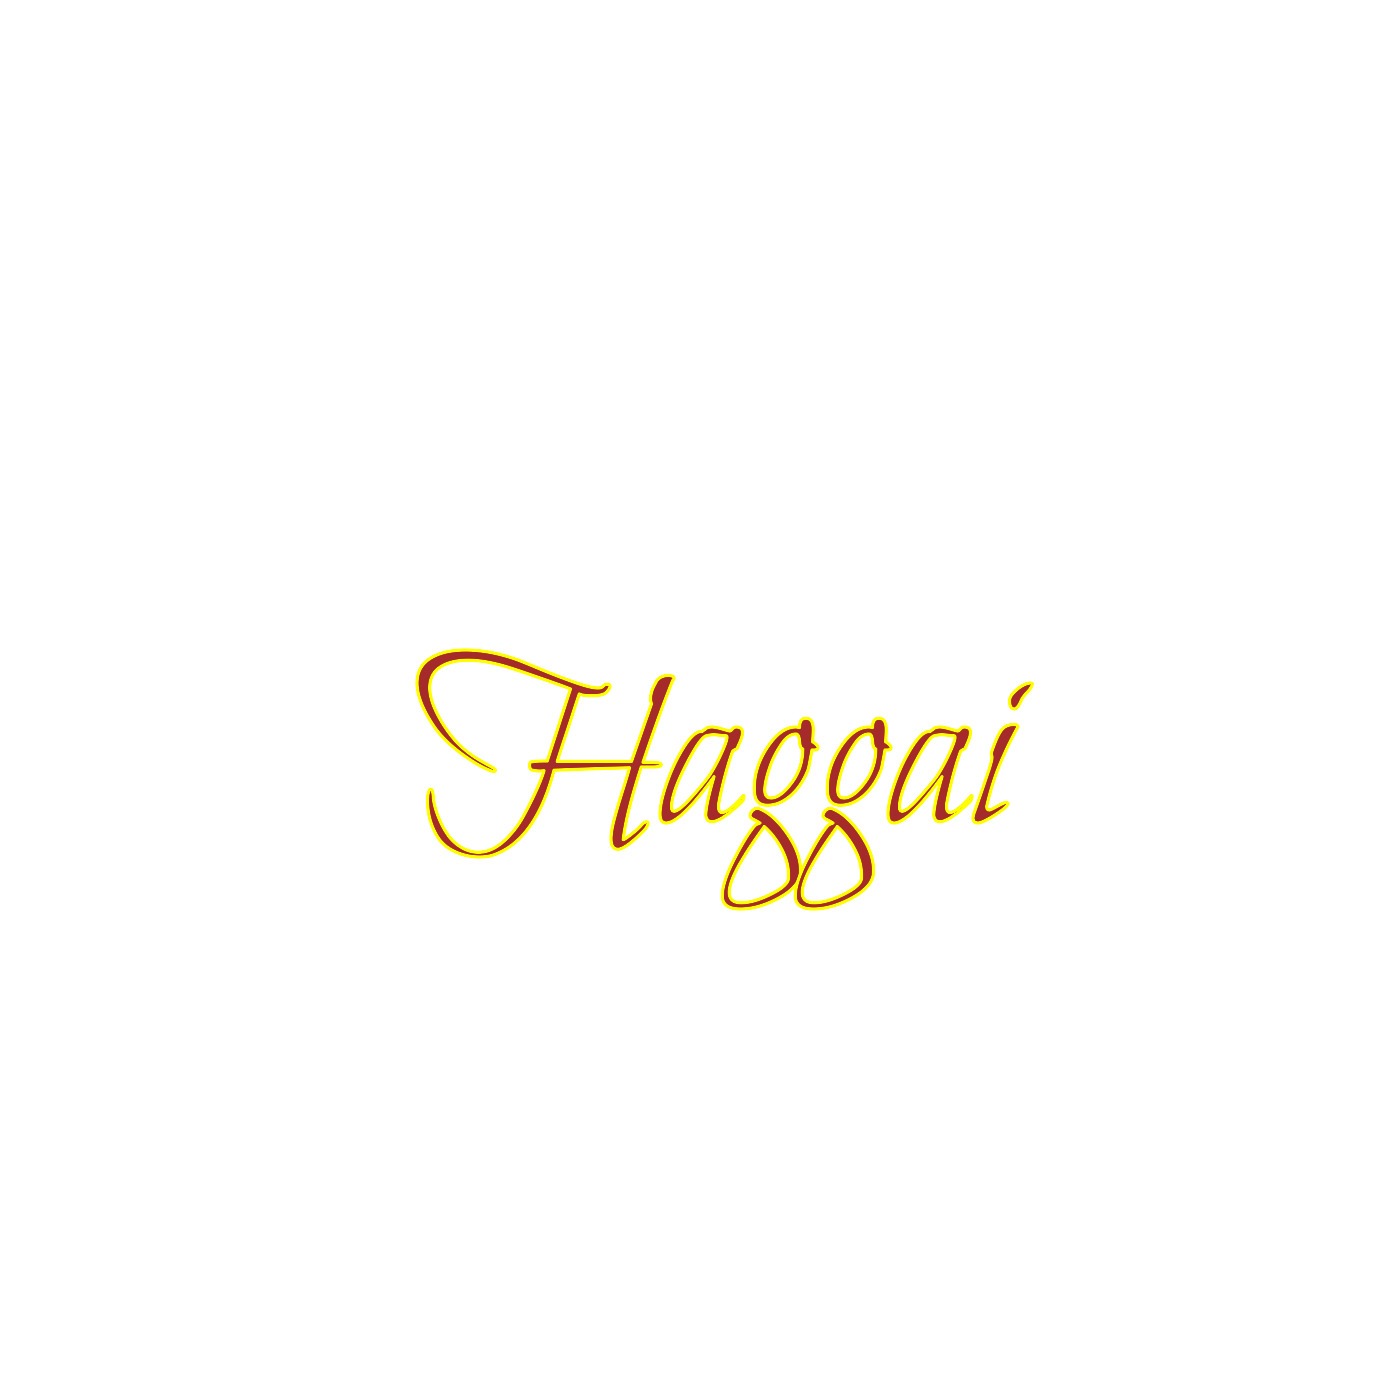 Haggai 1: In the second year of Darius the king, in the sixth month, in the first day of the month, came the word of the LORD by Haggai the prophet unto Zerubbabel the son of Shealtiel, governor of Ju